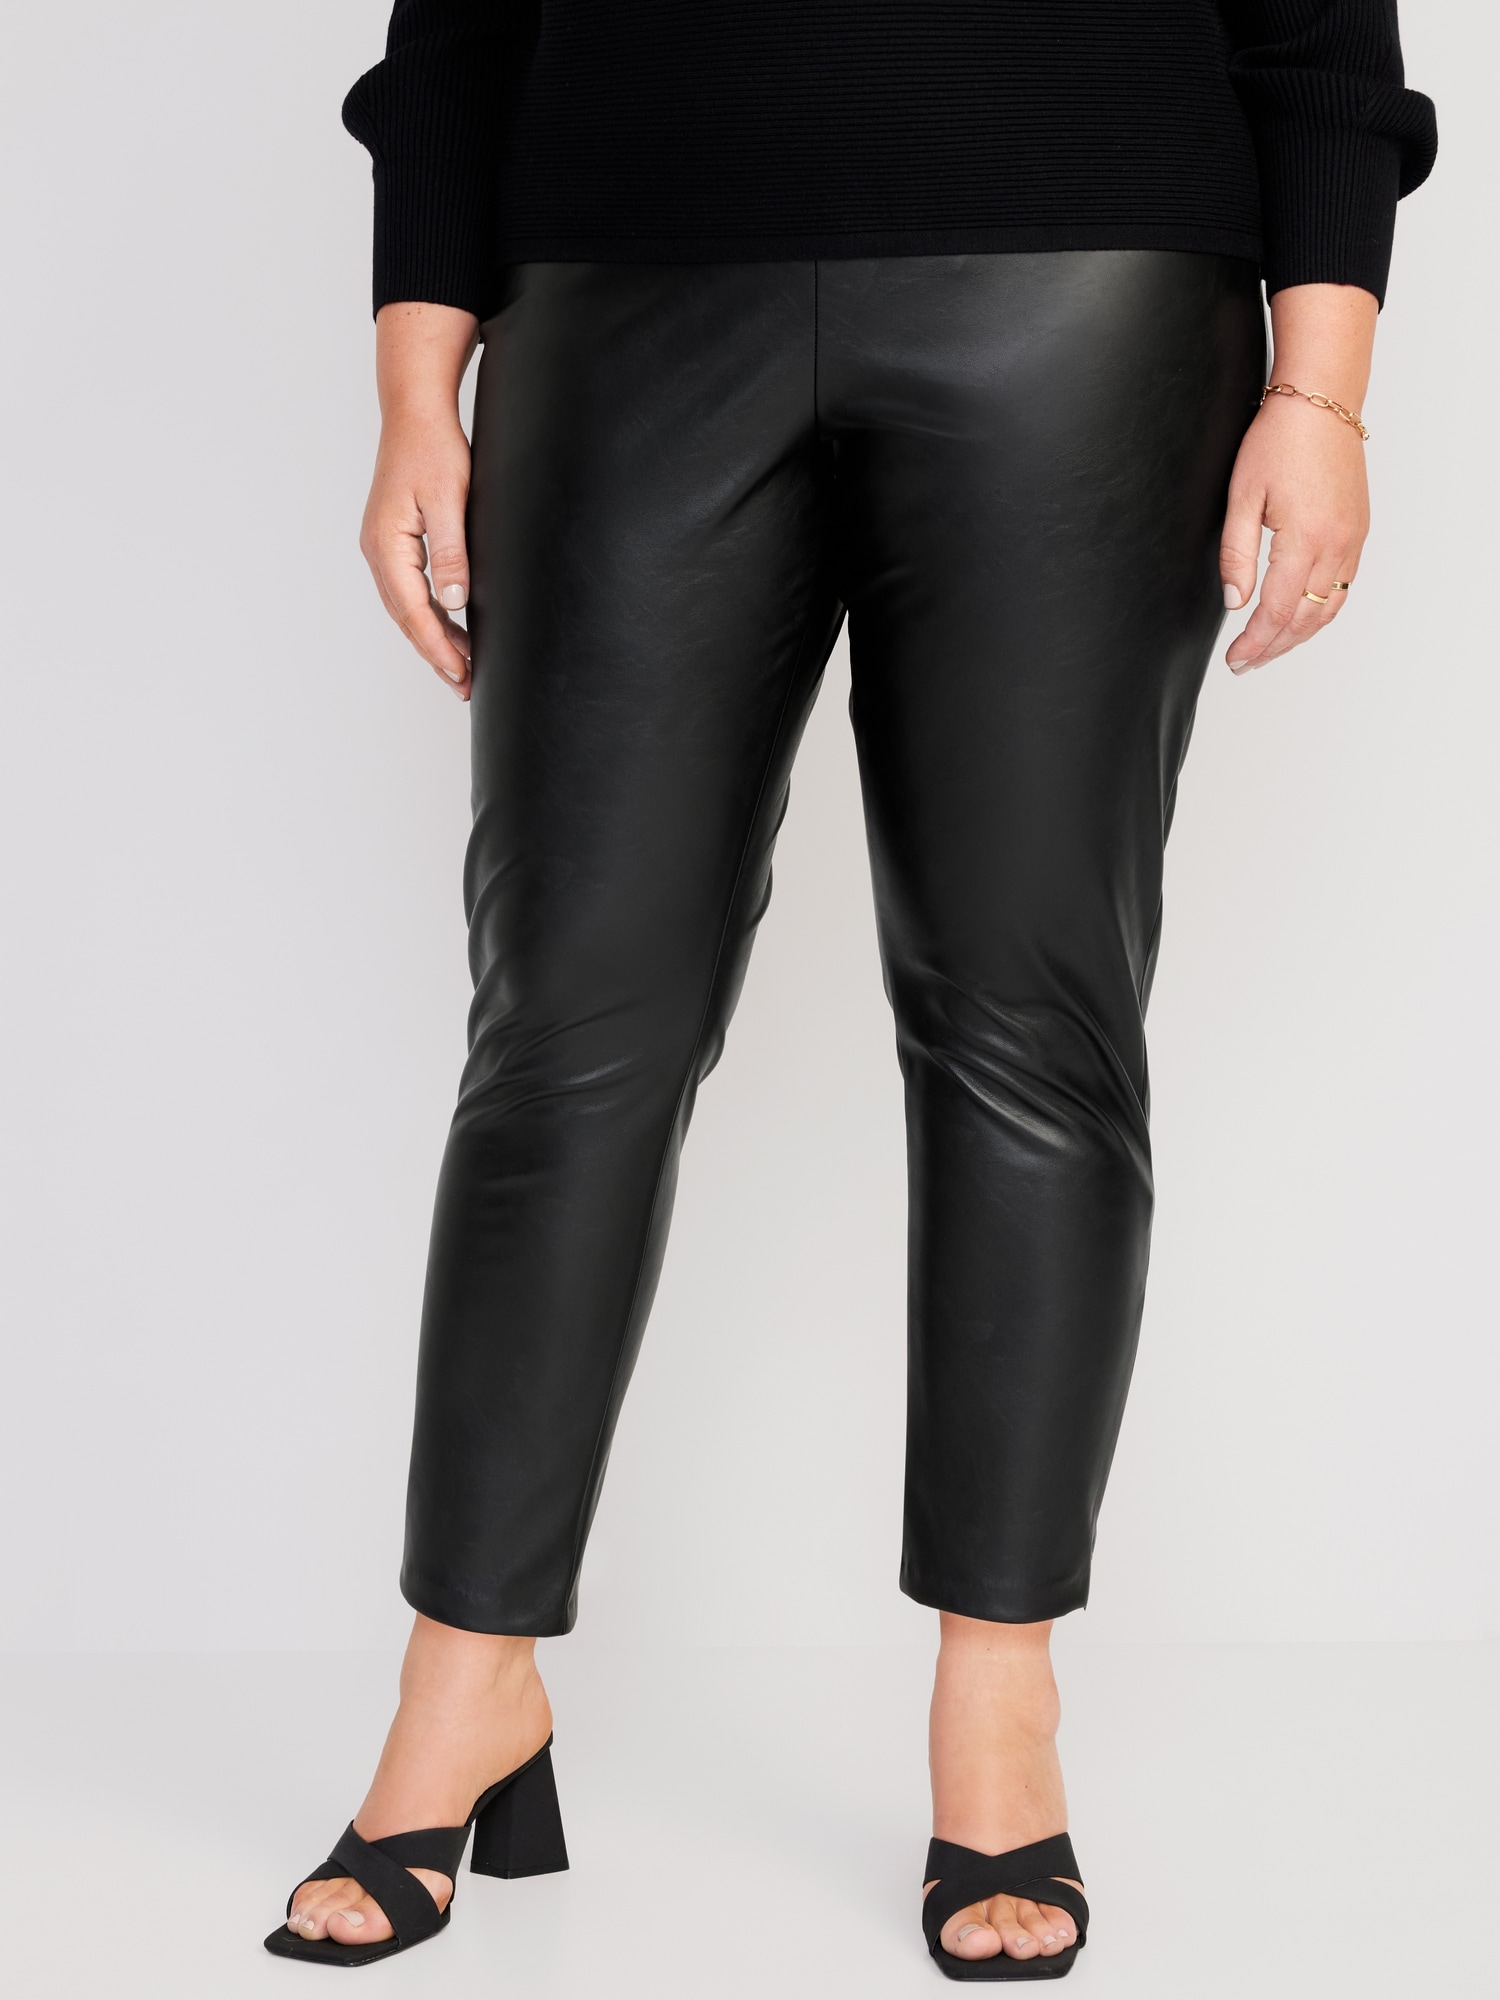 Extra High-Waisted Faux Leather Pants for Women | Old Navy